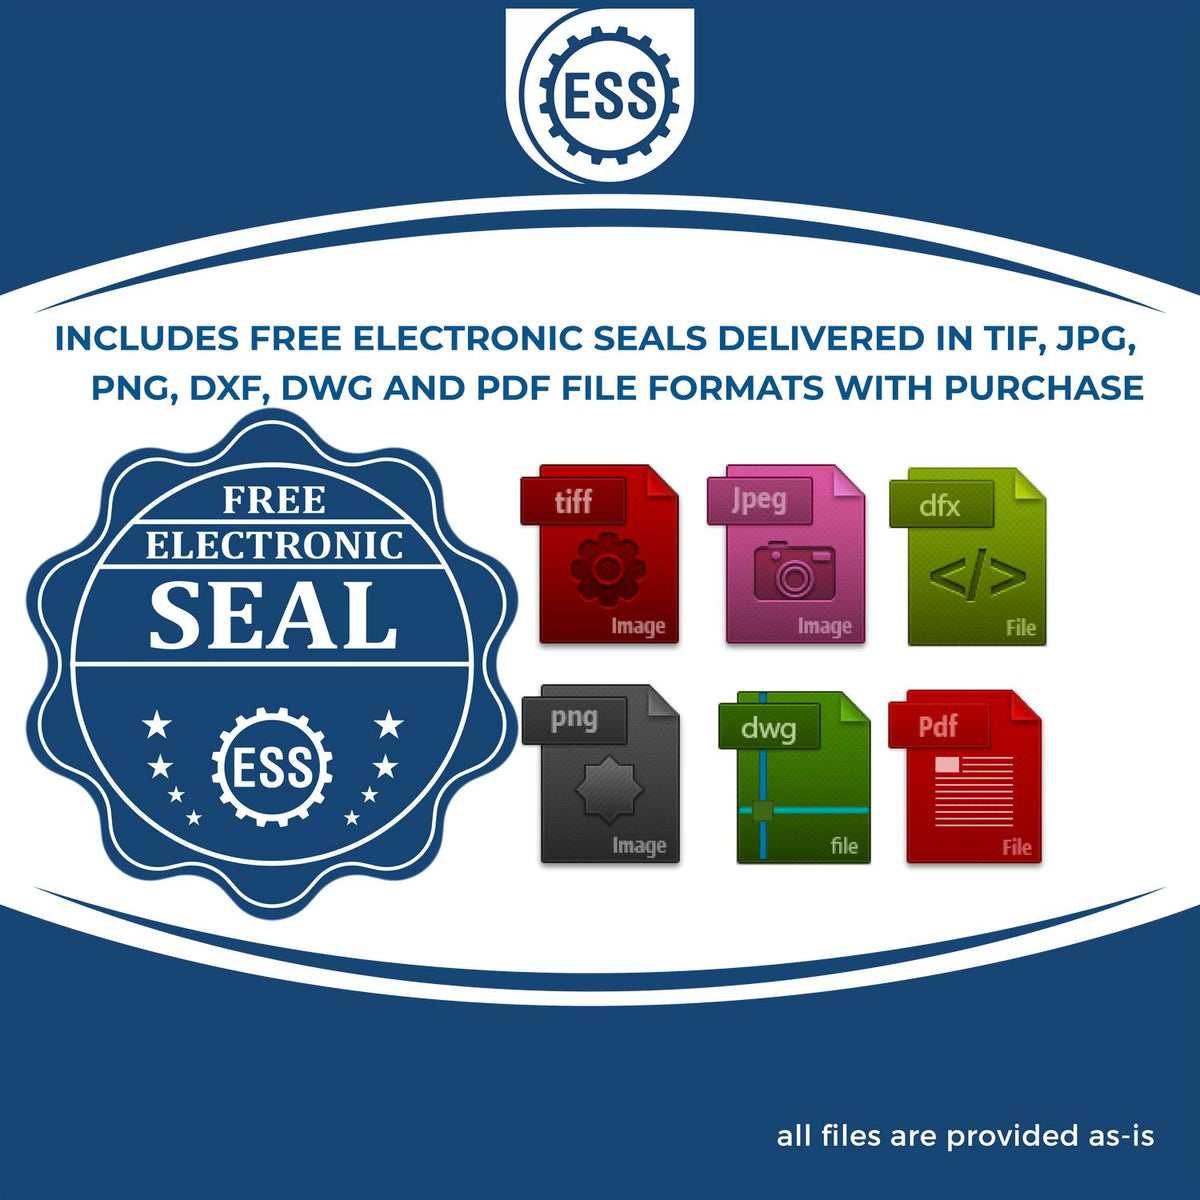 An infographic for the free electronic seal for the Long Reach Massachusetts Land Surveyor Seal illustrating the different file type icons such as DXF, DWG, TIF, JPG and PNG.